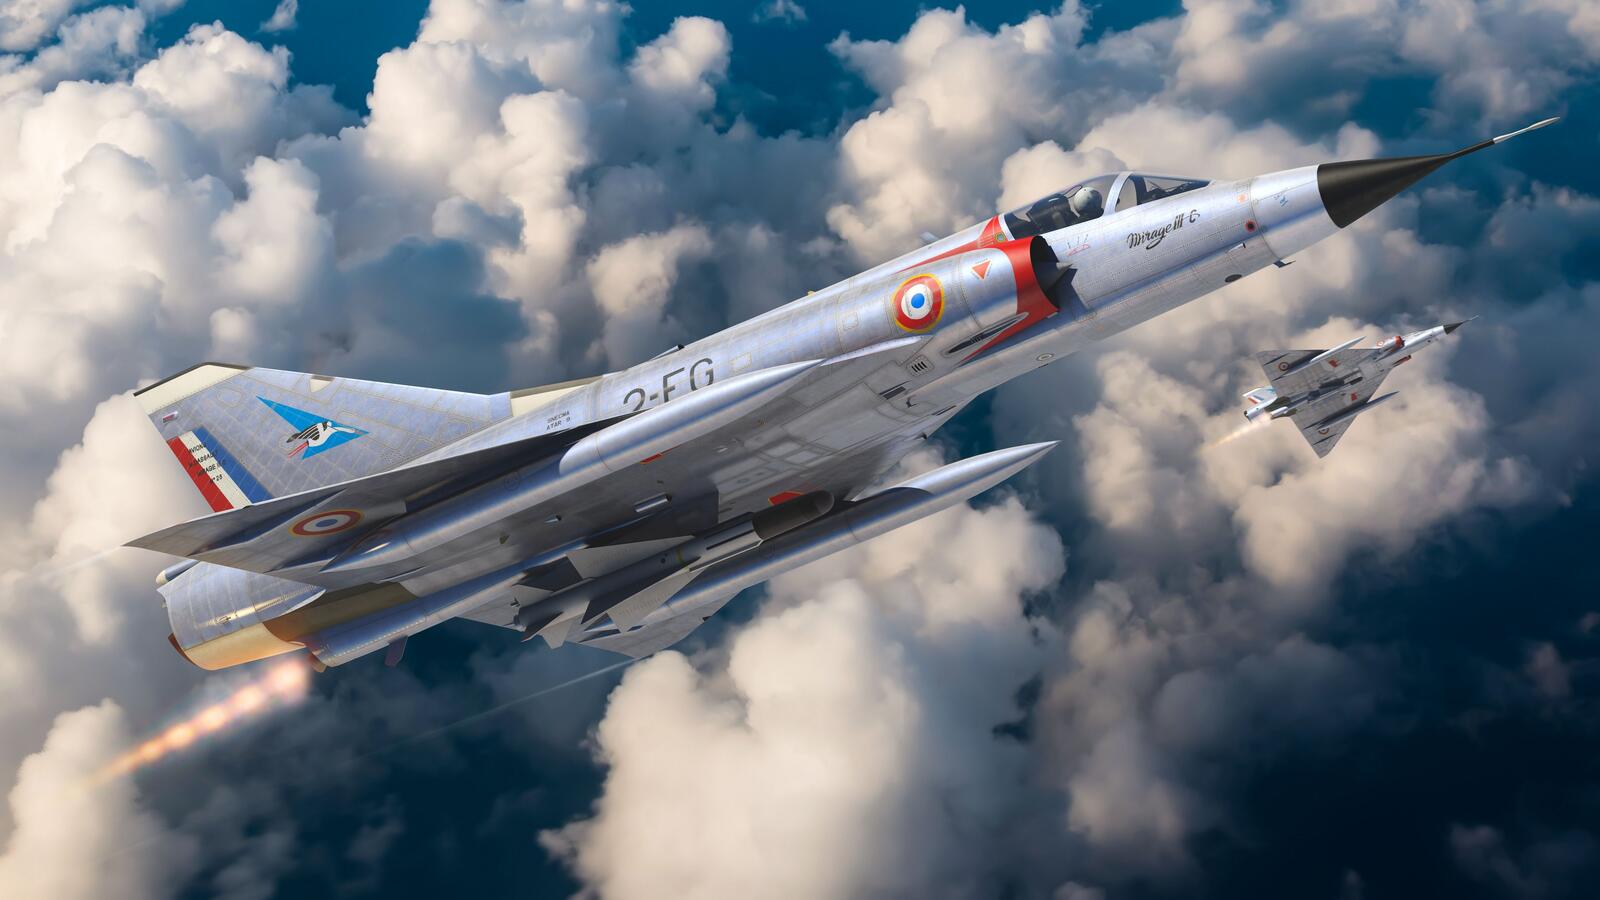 Free photo The dassault mirage lll fighter in the sky